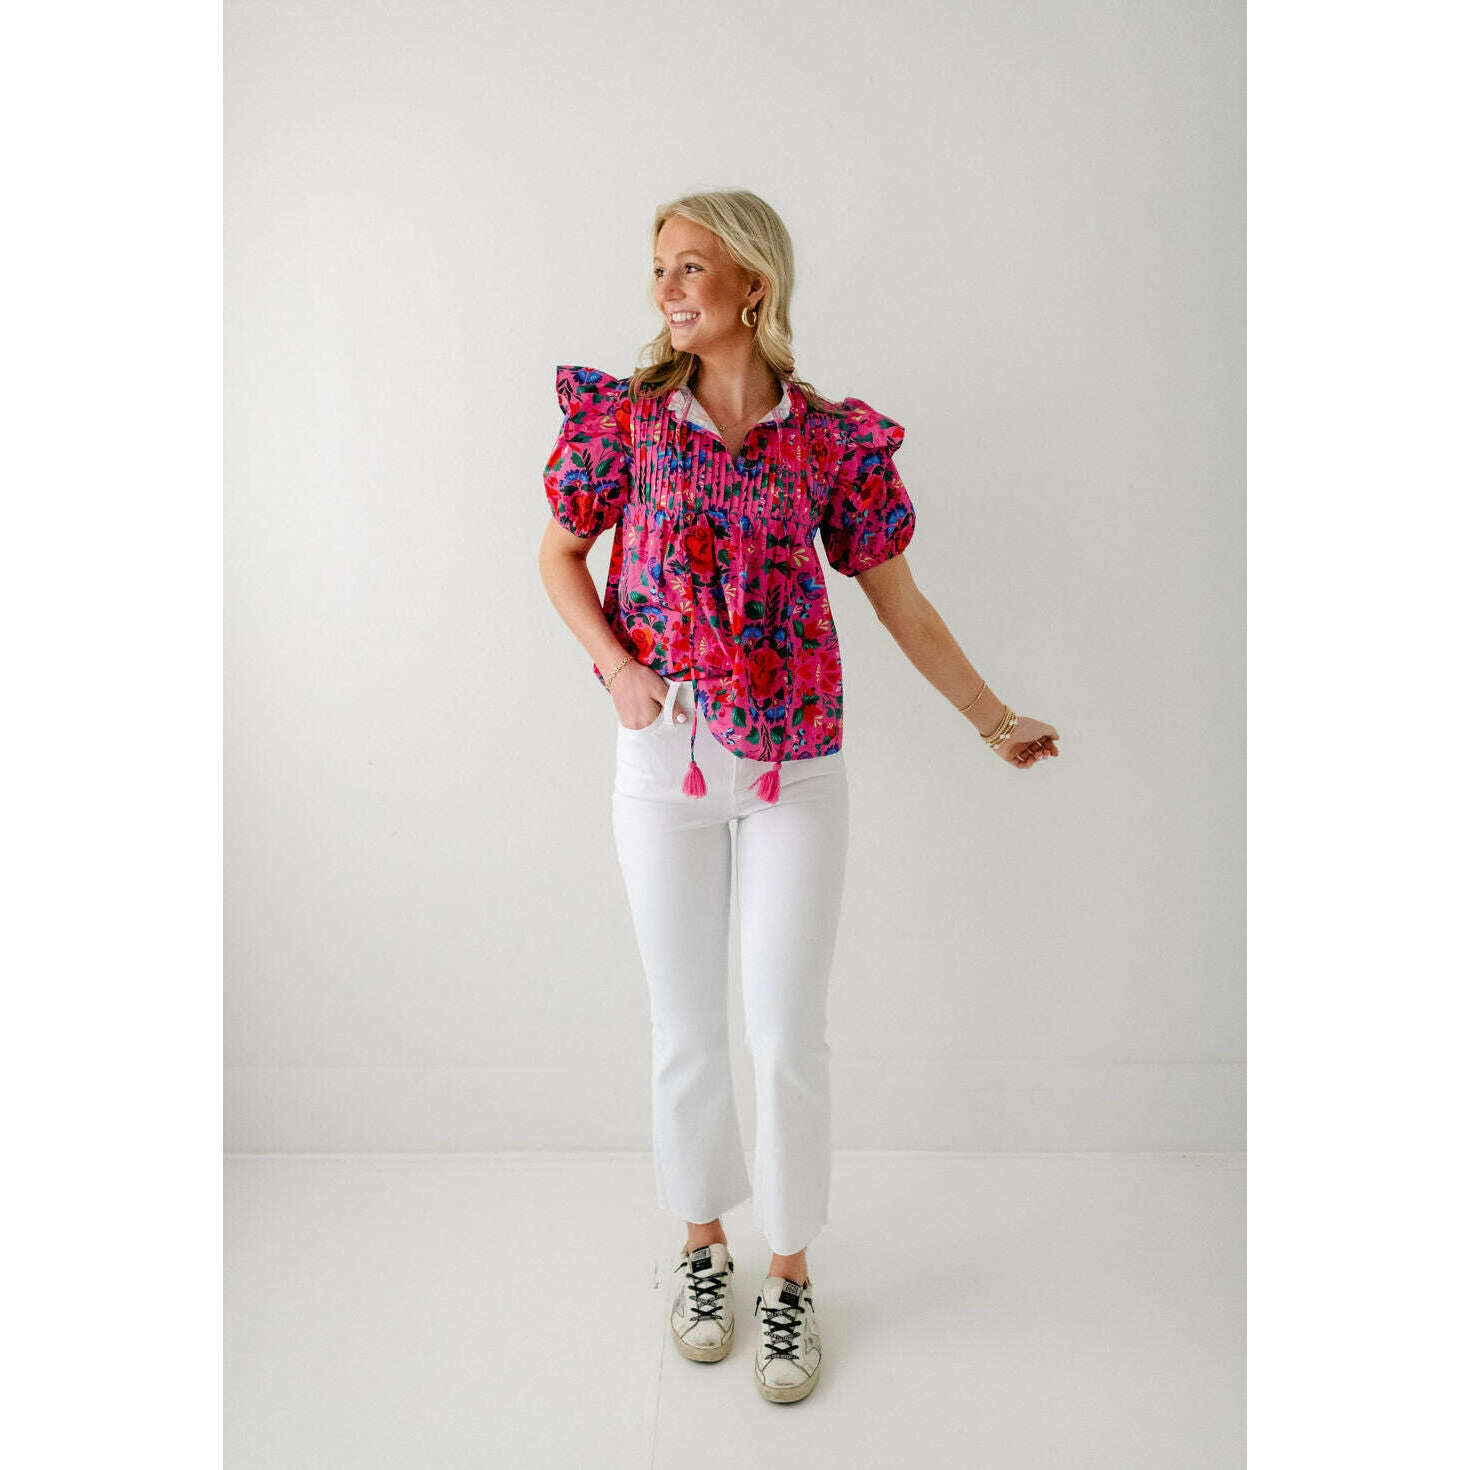 8.28 Boutique:Sincerely Ours,Sincerely Ours Sunrise Solstic Poplin Top,Tops